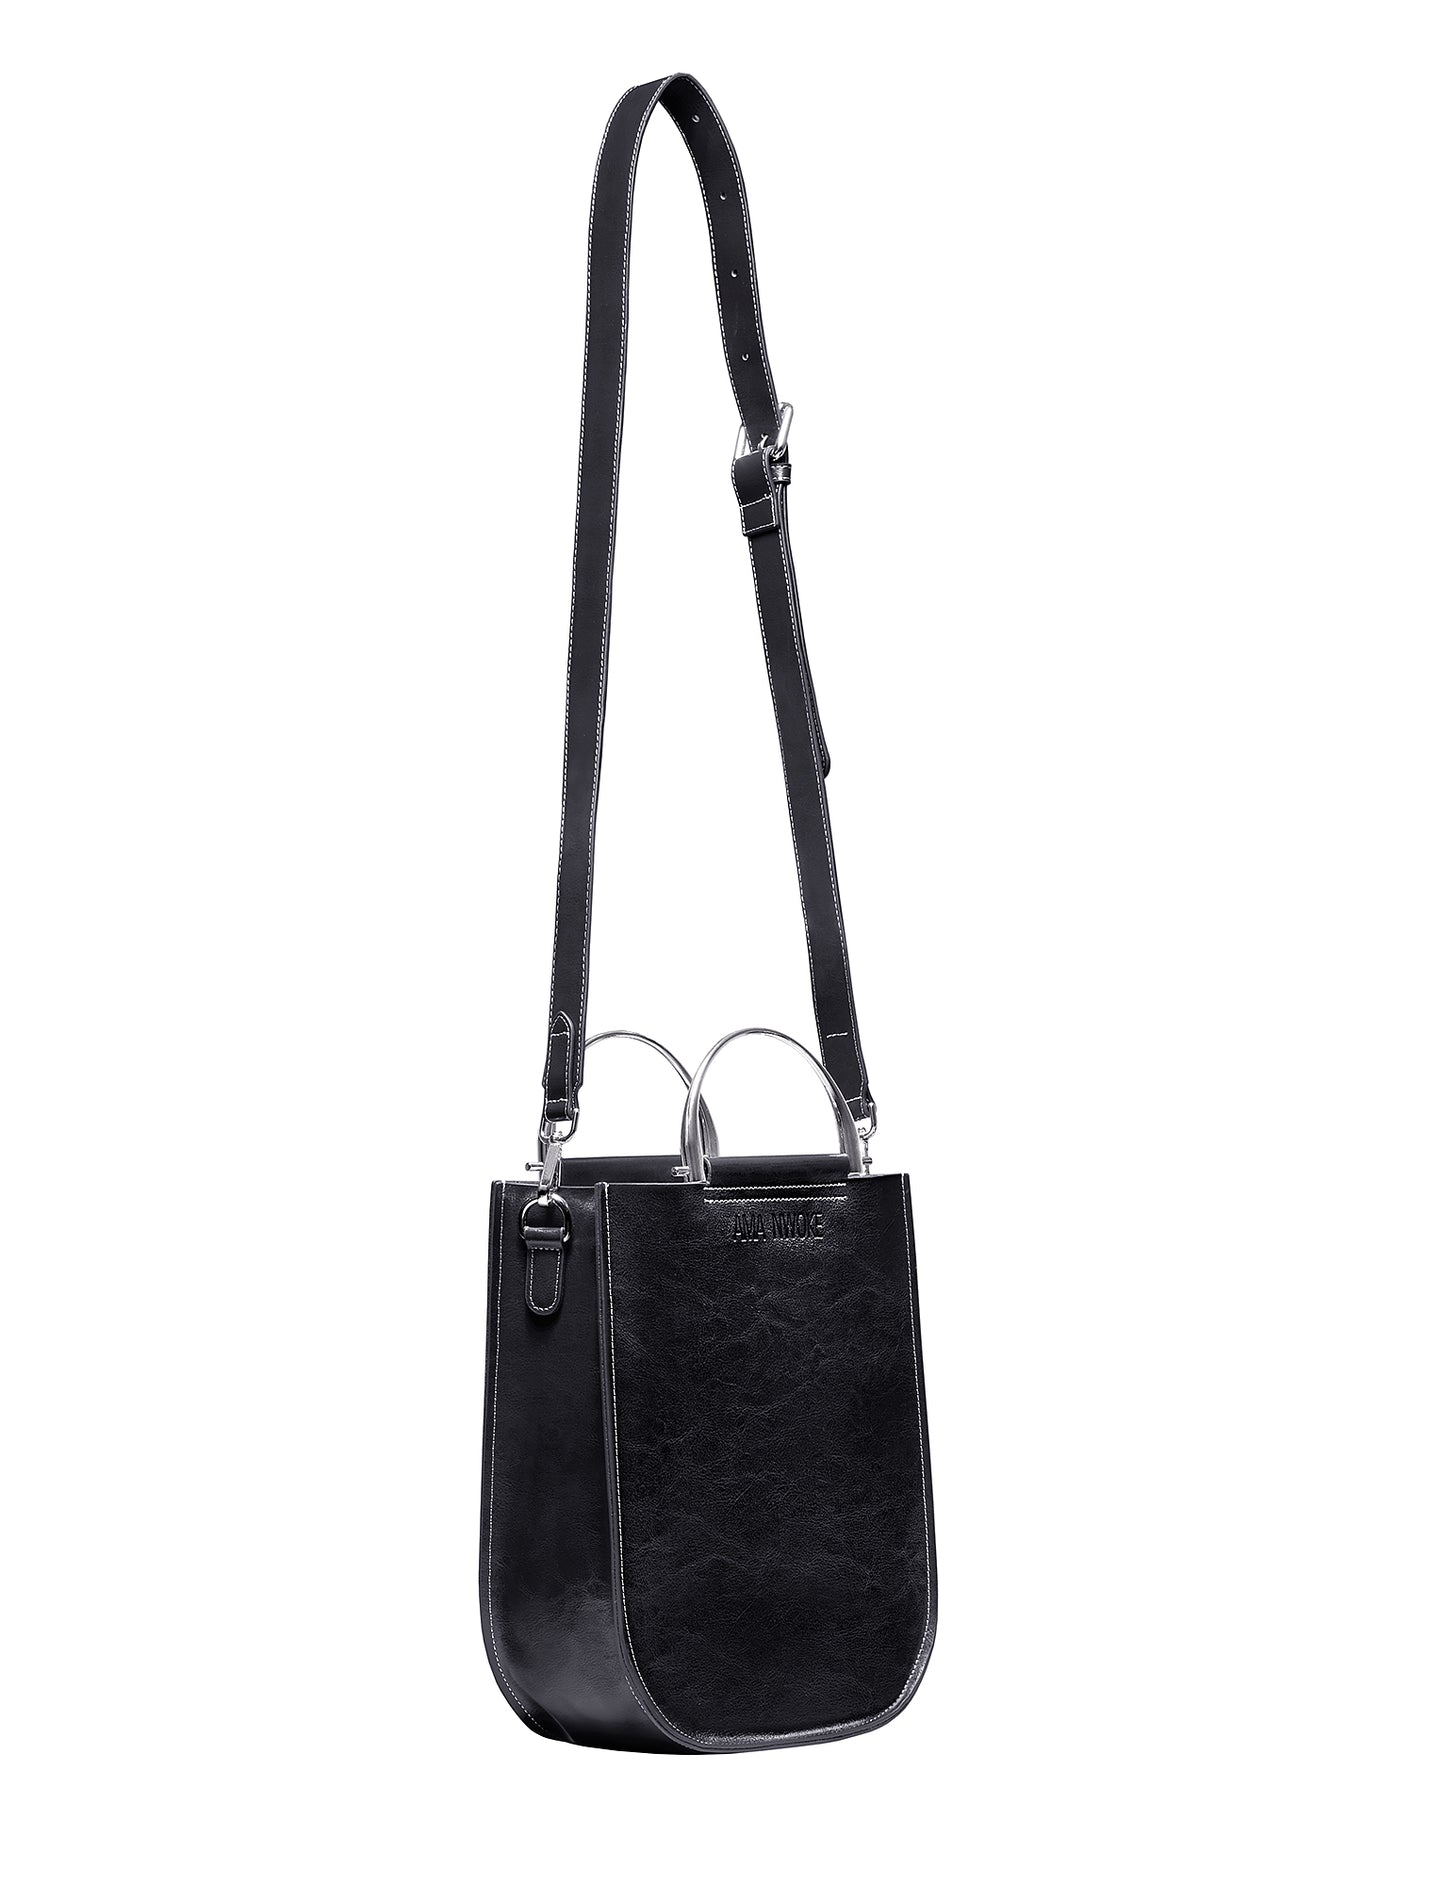 Soft Leather Tote in Sleek Black-Silver Handle